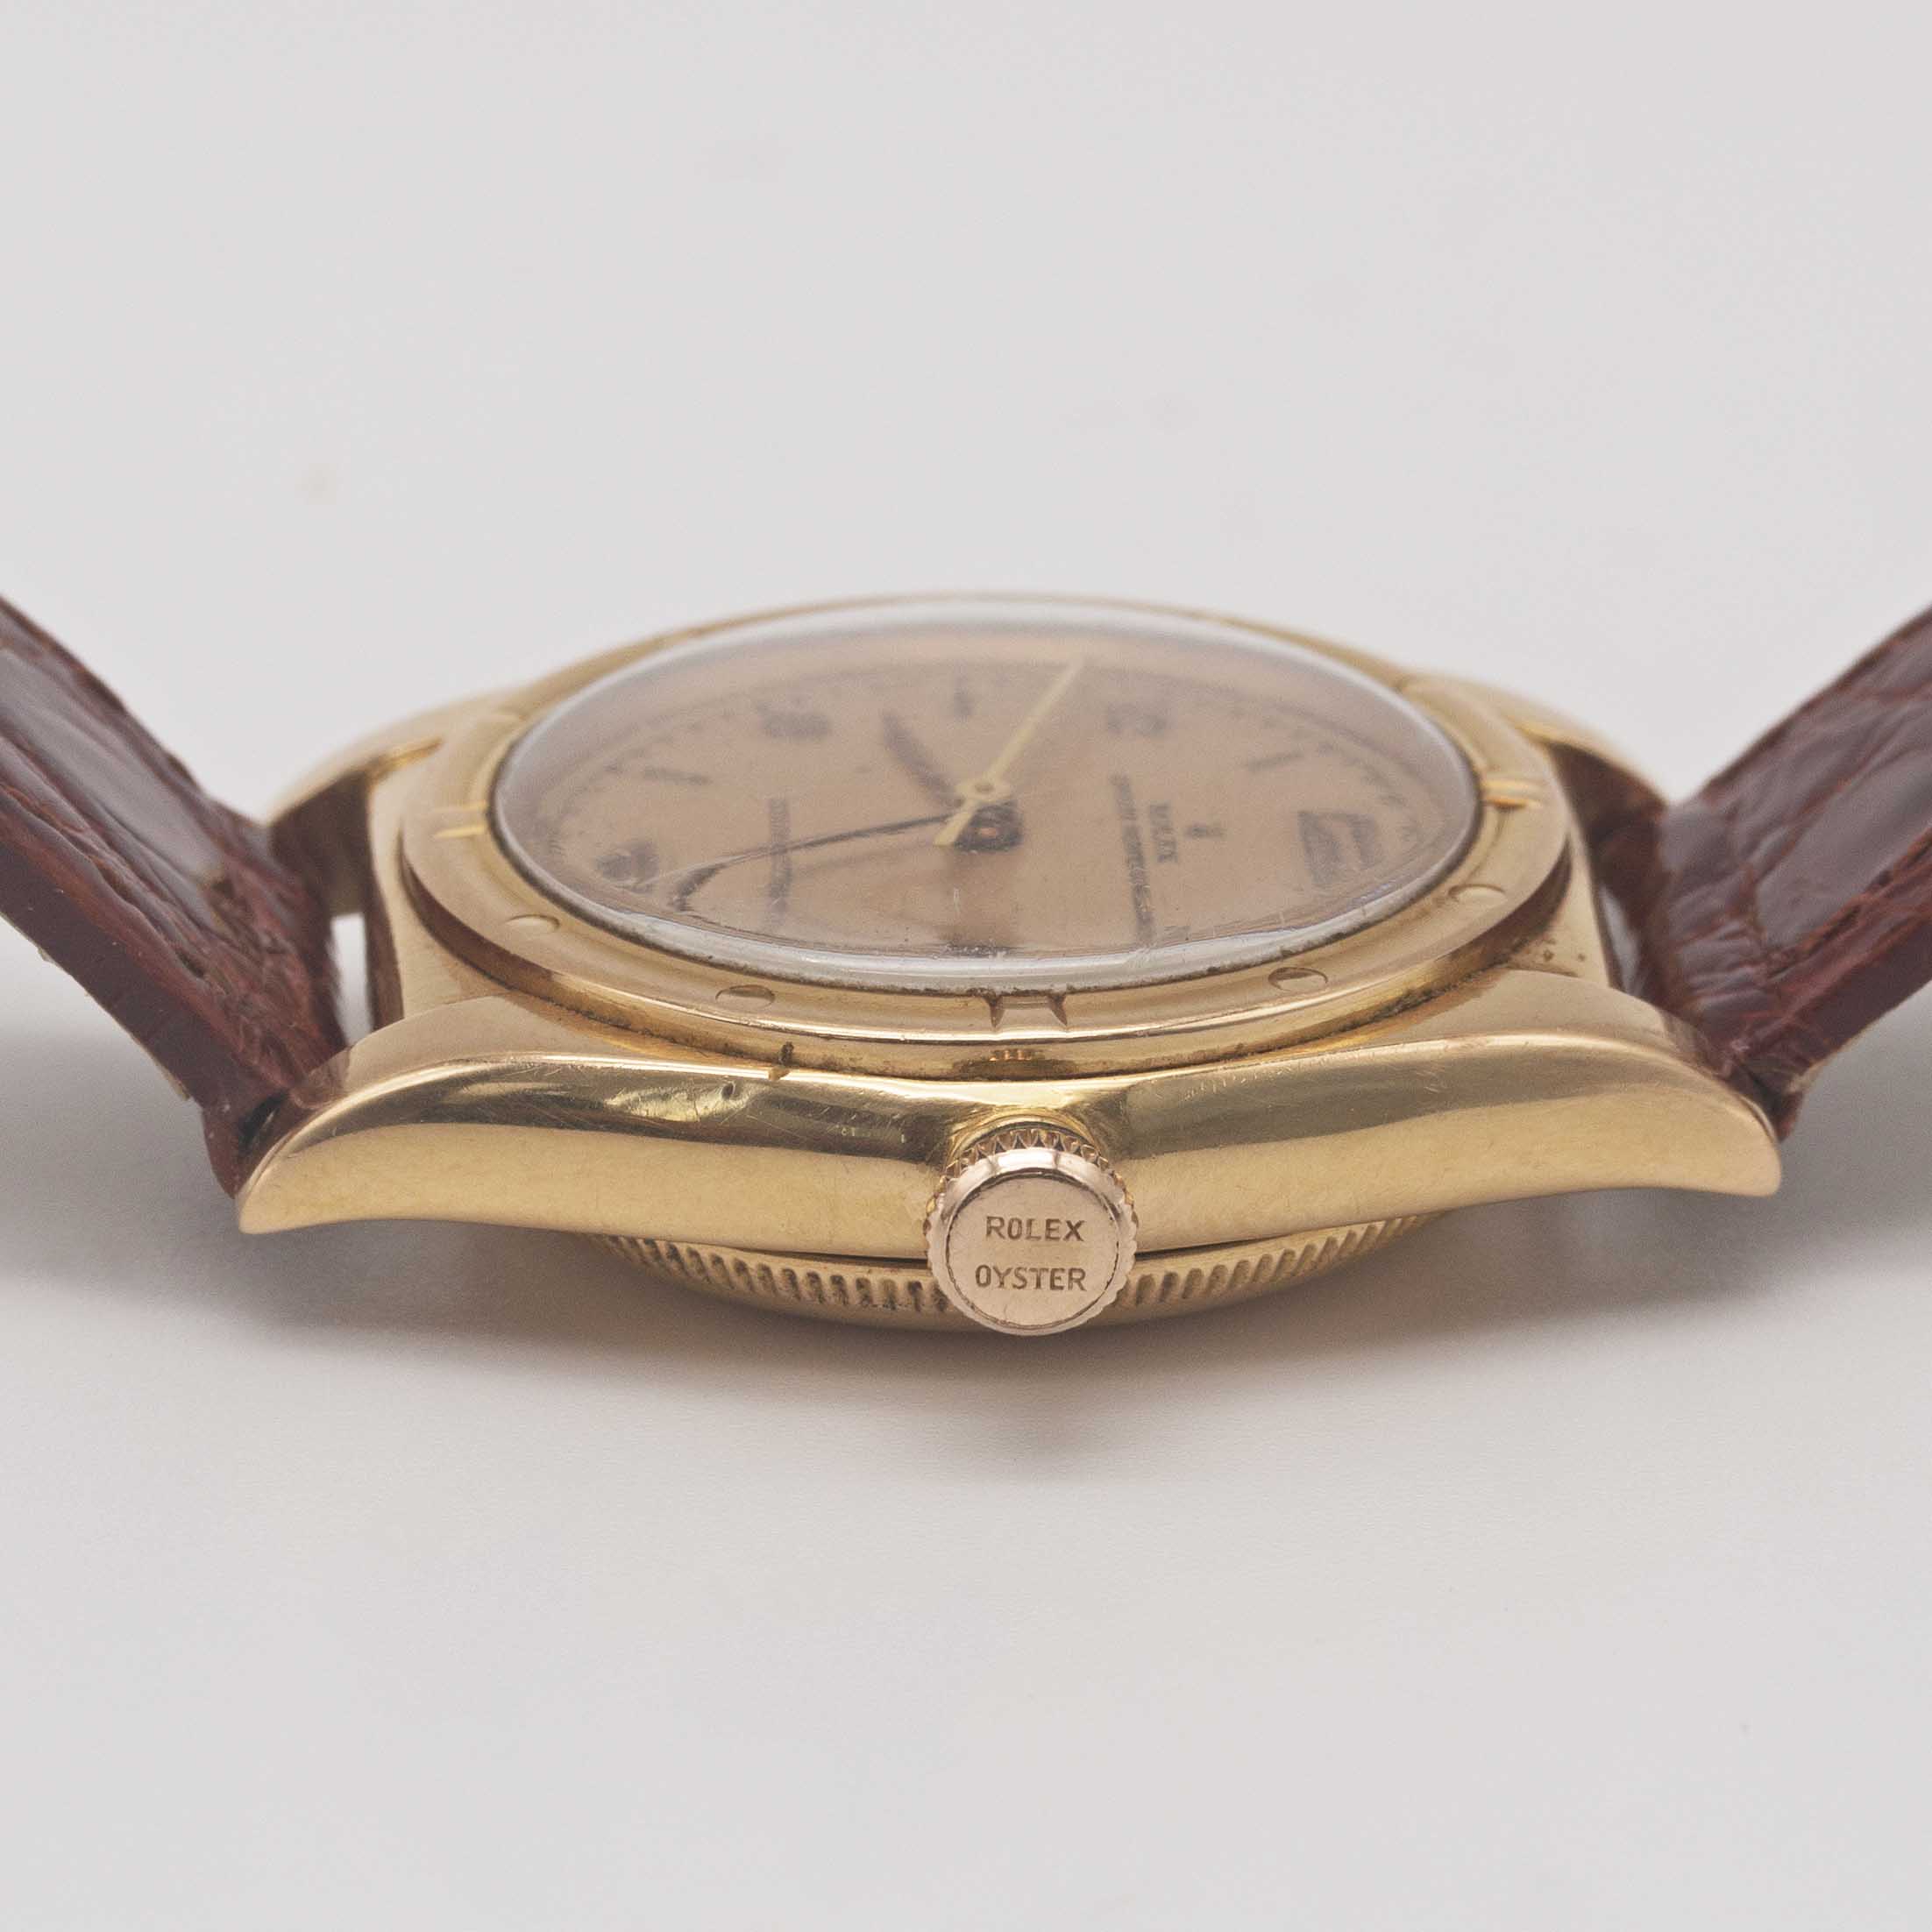 A GENTLEMAN'S 18K SOLID YELLOW GOLD ROLEX OYSTER PERPETUAL CHRONOMETRE "BUBBLE BACK" WRIST WATCH - Image 9 of 10